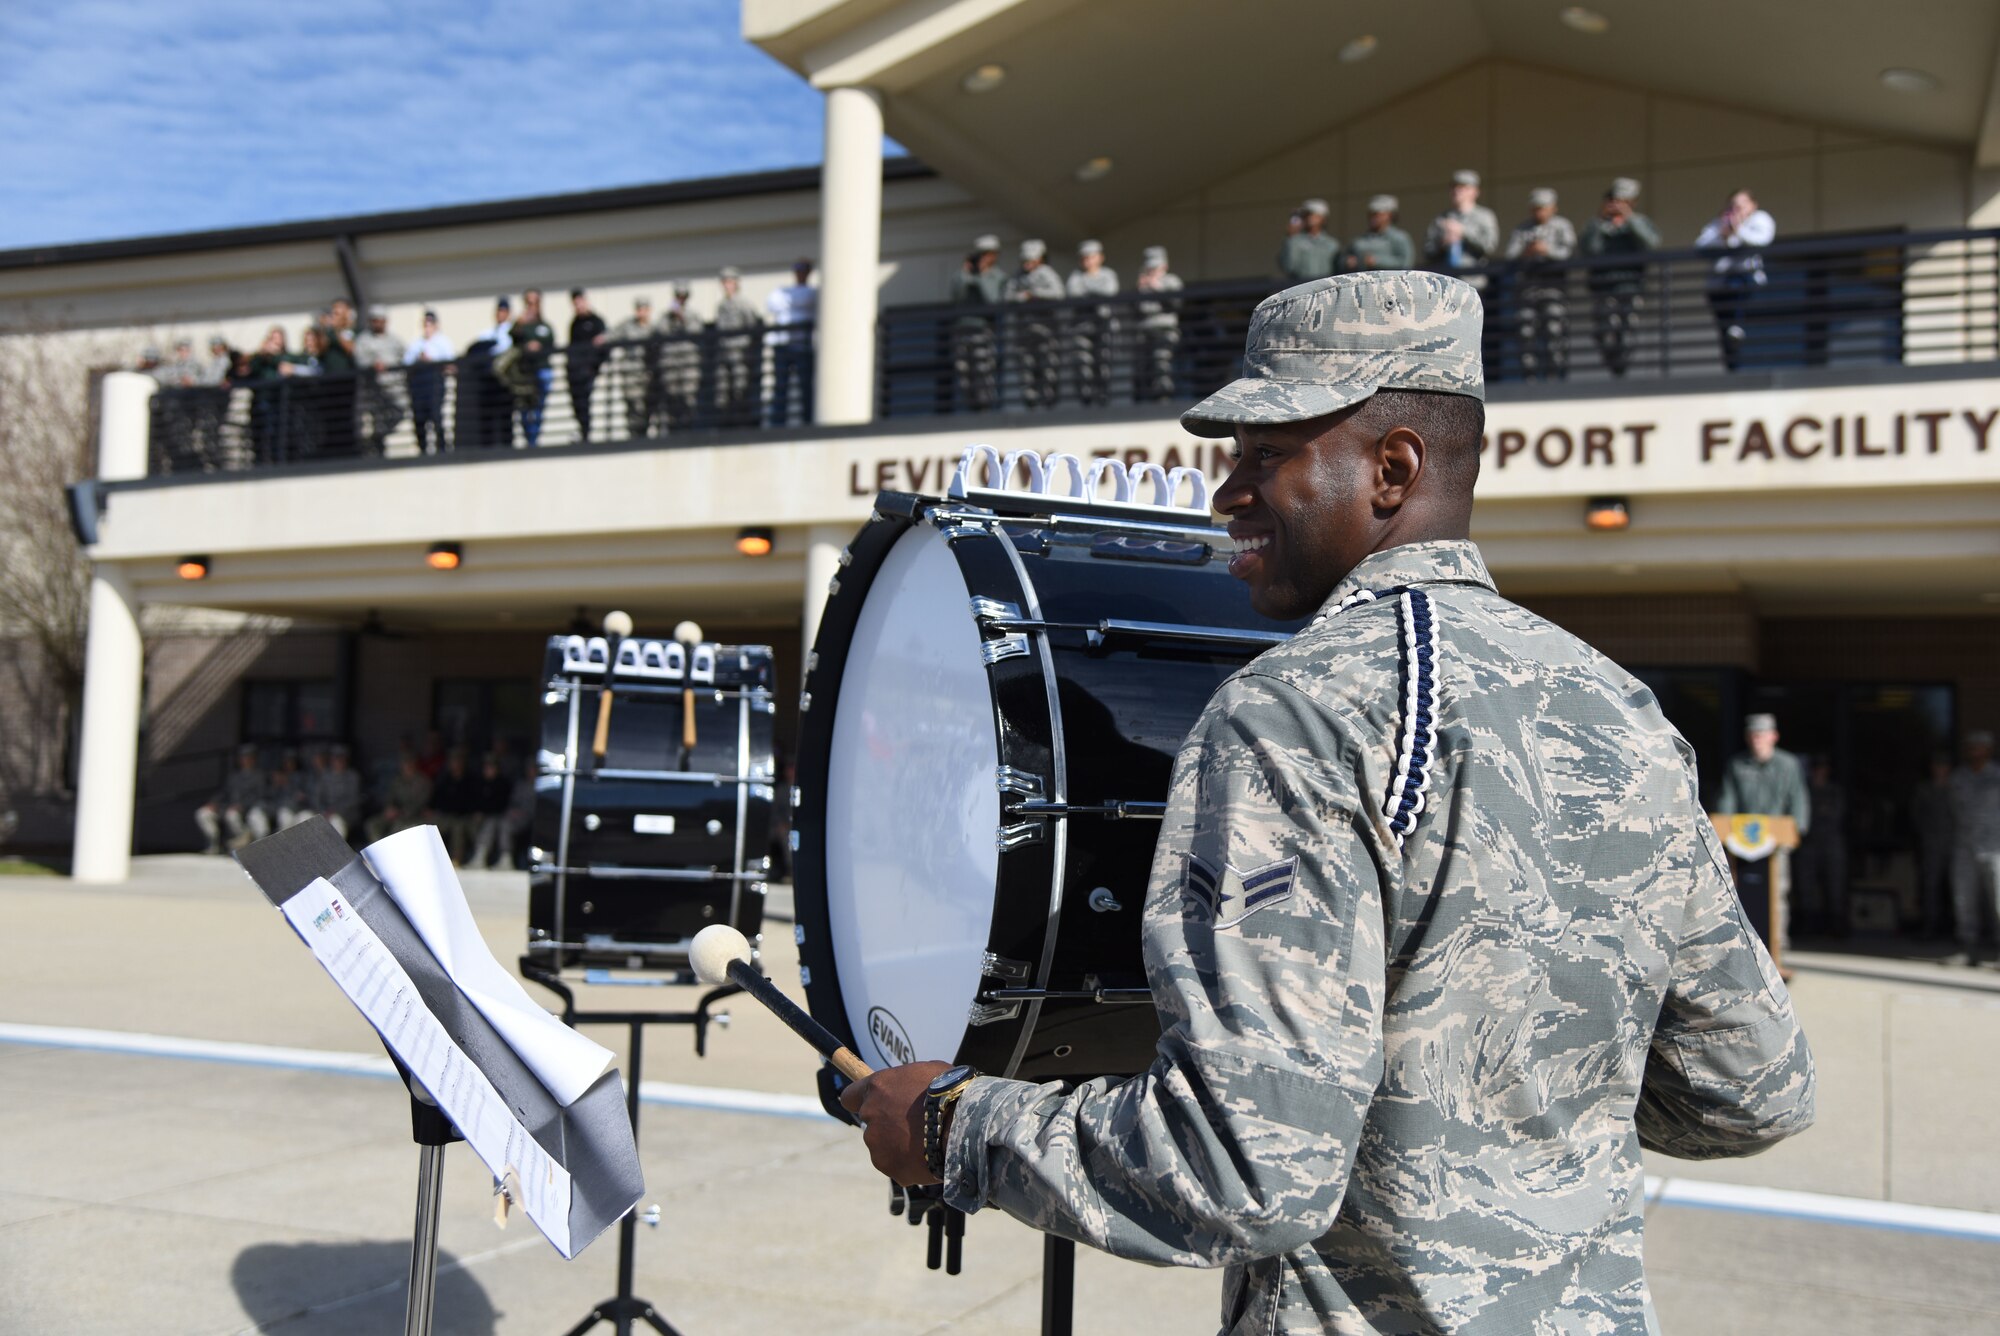 U.S. Air Force Airman 1st Class Jeffrey Davis, 81st Training Group Drum and Bugle Corps member, performs during the 81st TRG drill down on the Levitow Training Support Facility drill pad March 9, 2018, on Keesler Air Force Base, Mississippi. Airmen from the 81st TRG competed in a quarterly open ranks inspection, regulation drill routine and freestyle drill routine. The 335th Training Squadron “Bulls” took first place this quarter. (U.S. Air Force photo by Kemberly Groue)